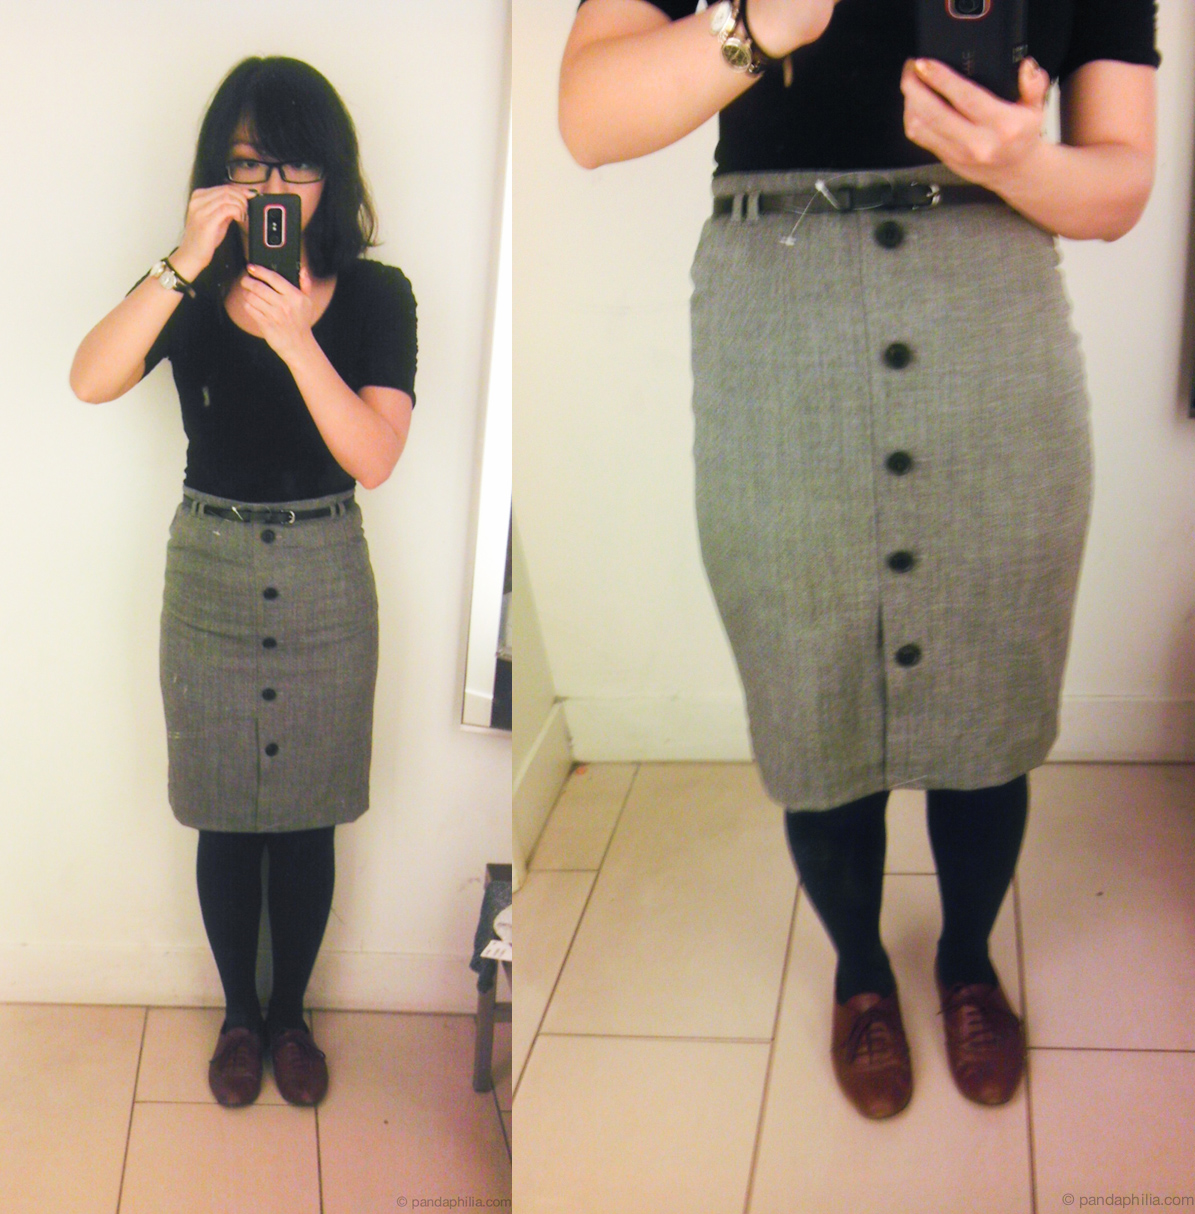 pandaphilia: H&M Spring/March 2012 Fitting Room Review